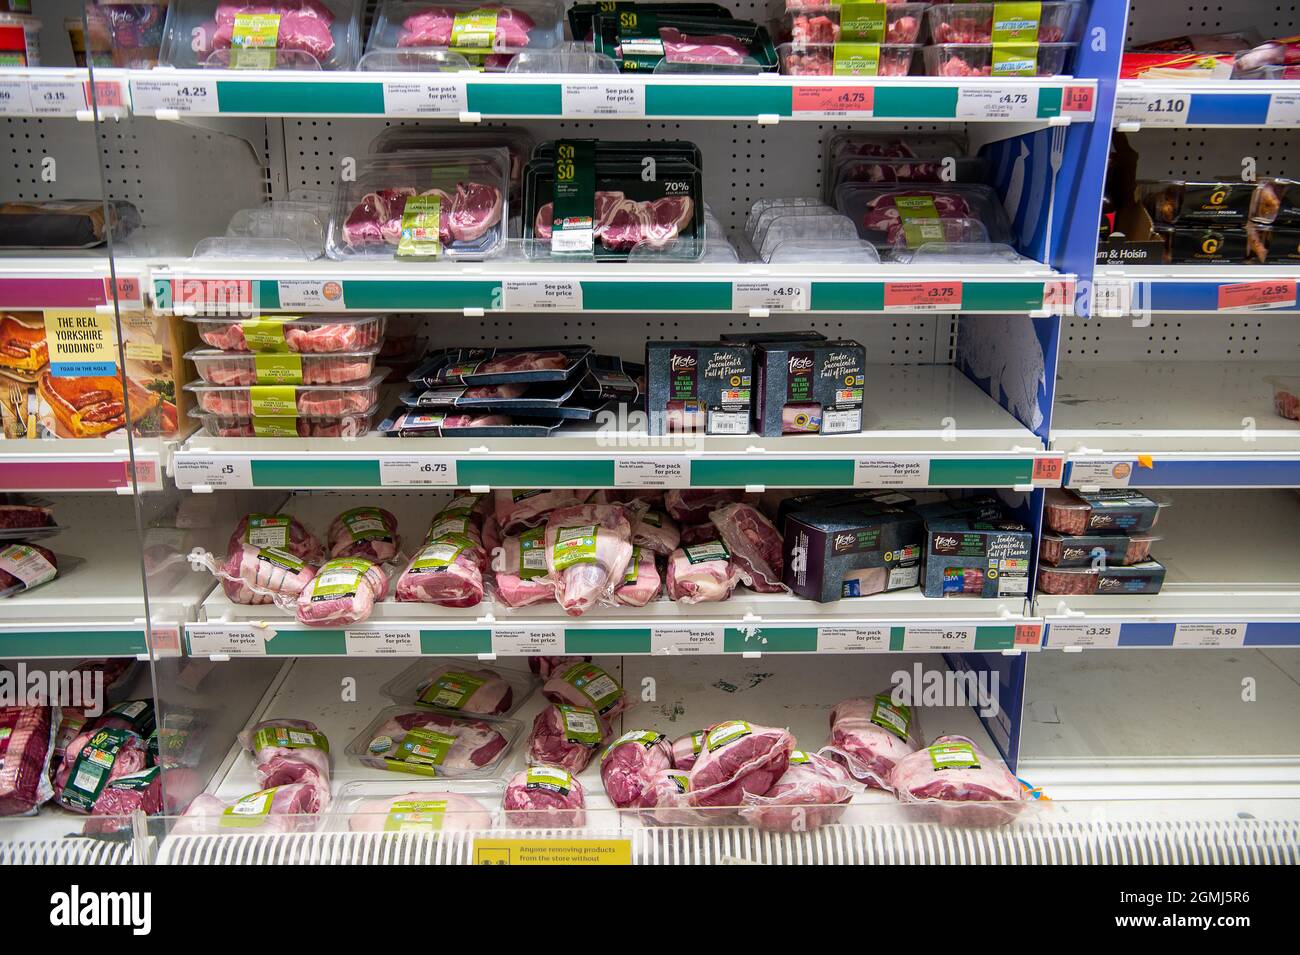 Taplow, UK. 19th September, 2021. The meat isle including lamb. Sainsbury's Supermarket had a good supply of food in their store today. Some lines are still being impacted upon by supply chain issues including bottled water and carbonated drinks such as cola due a shortage of carbon dioxide. This may lead to meat running short in supermarkets as animals are stunned before being slaughtered using carbon dioxide. Credit: Maureen McLean/Alamy Live News Stock Photo